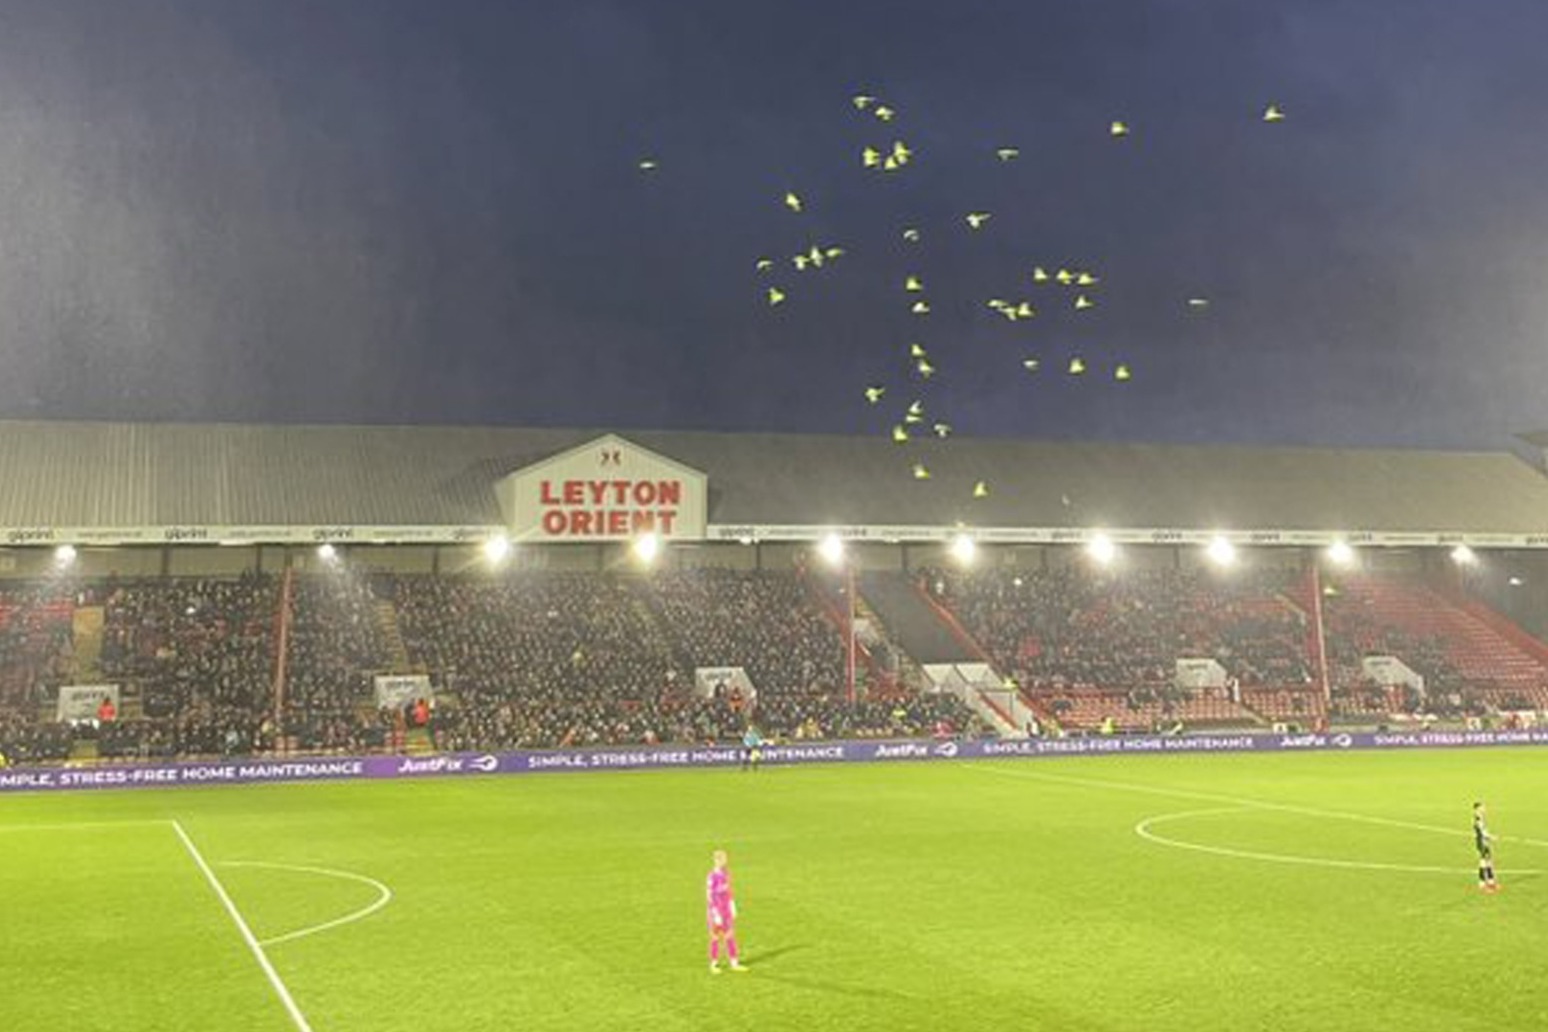 You’re only here for the parrots, fans chant as birds swarm Leyton Orient pitch 